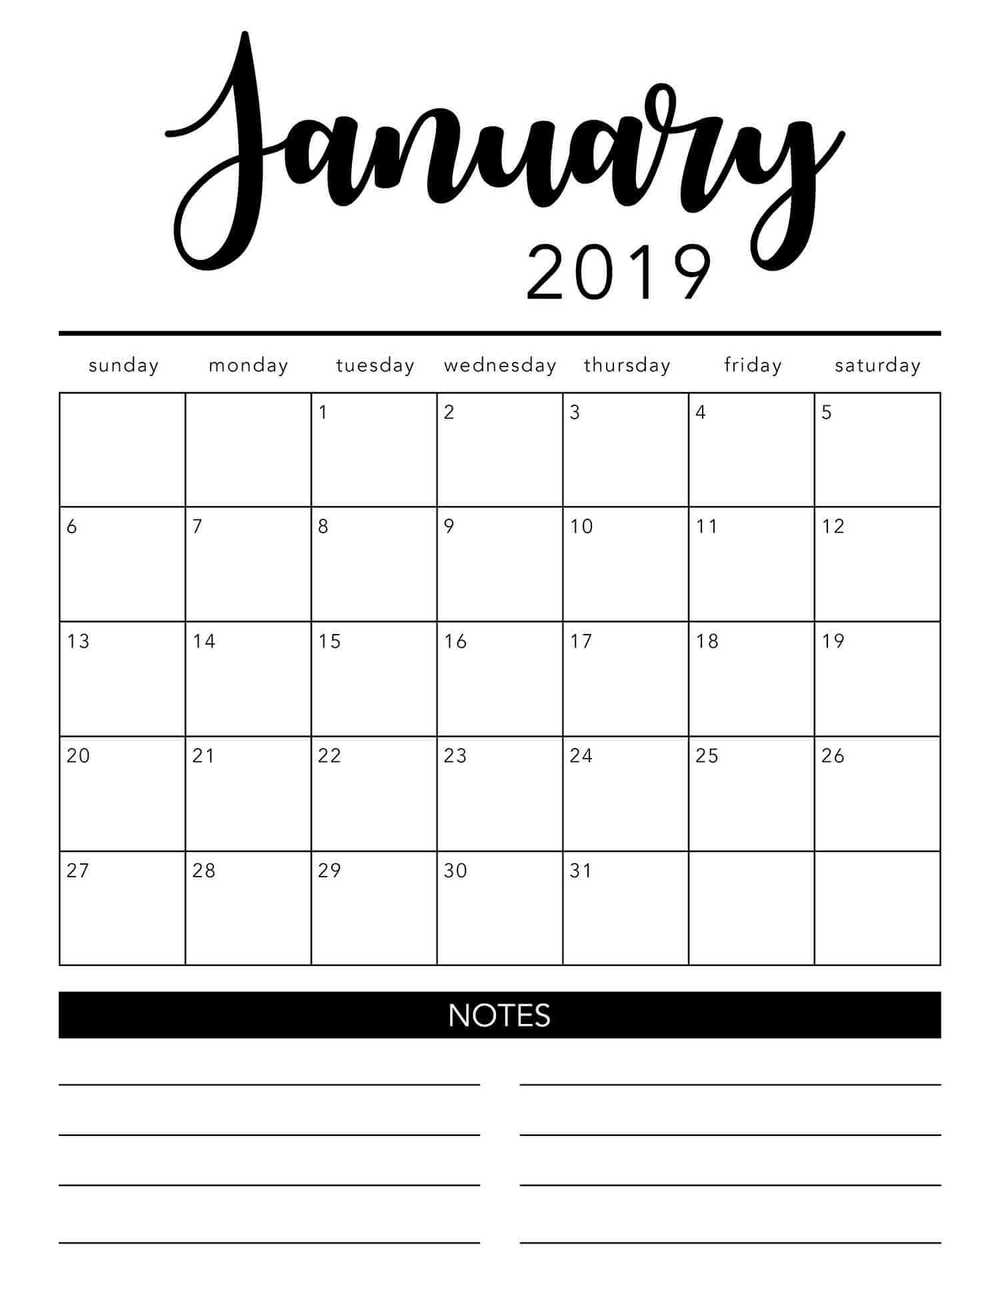 Free 2019 Printable Calendar Template (2 Colors!) - I Heart Naptime with Blank Printable Calendar By Month With Notes